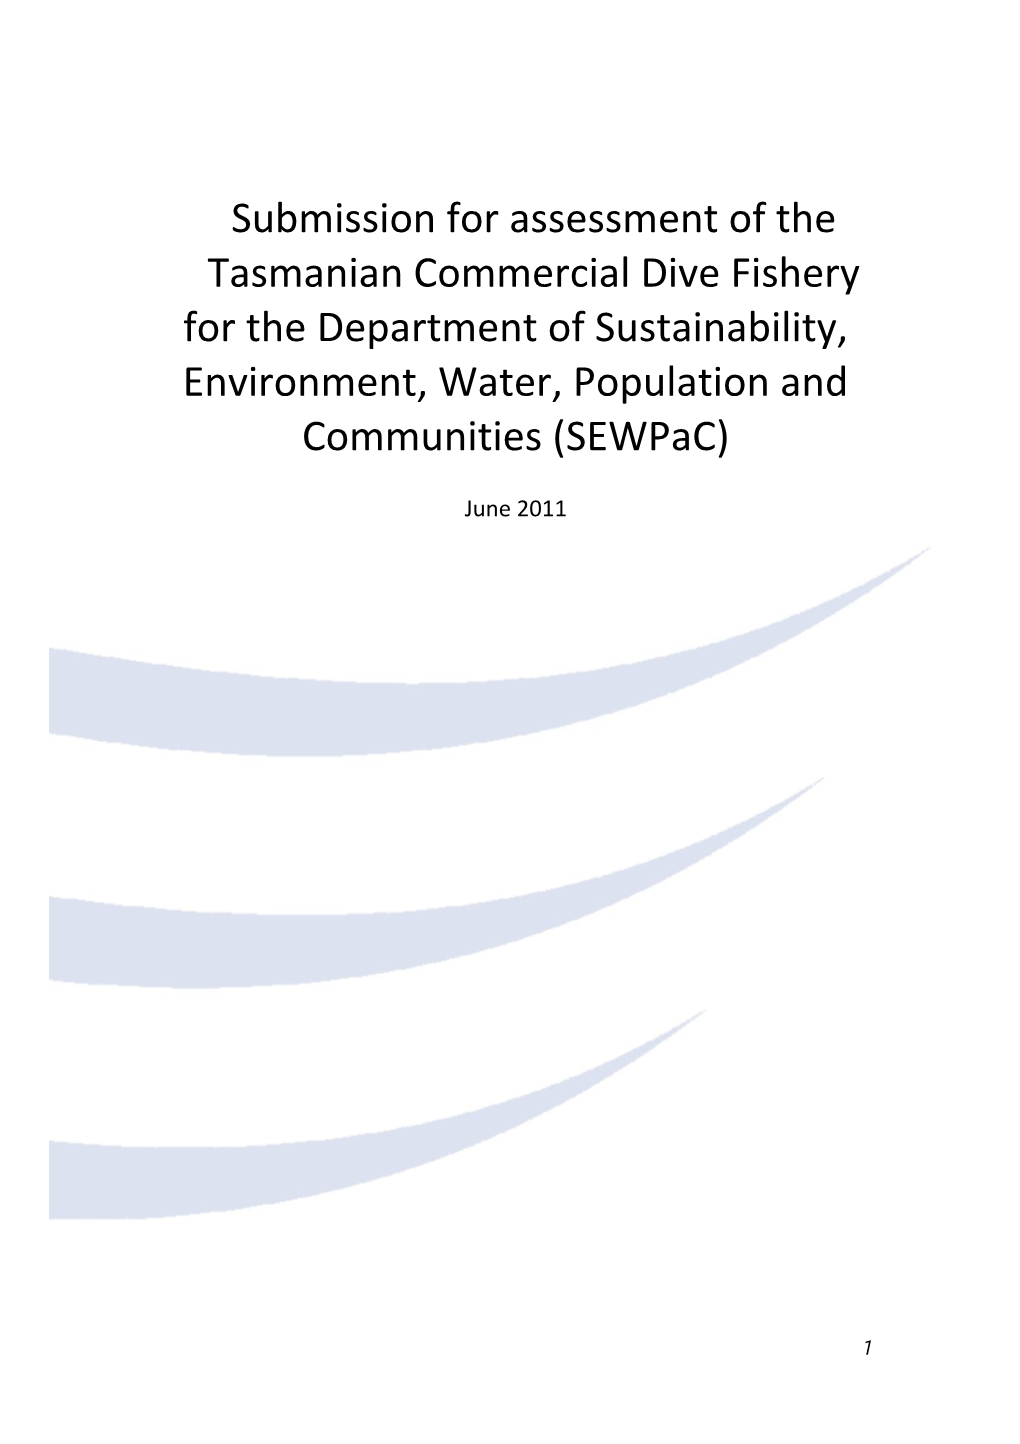 2011 Review of the Commercial Dive Fishery